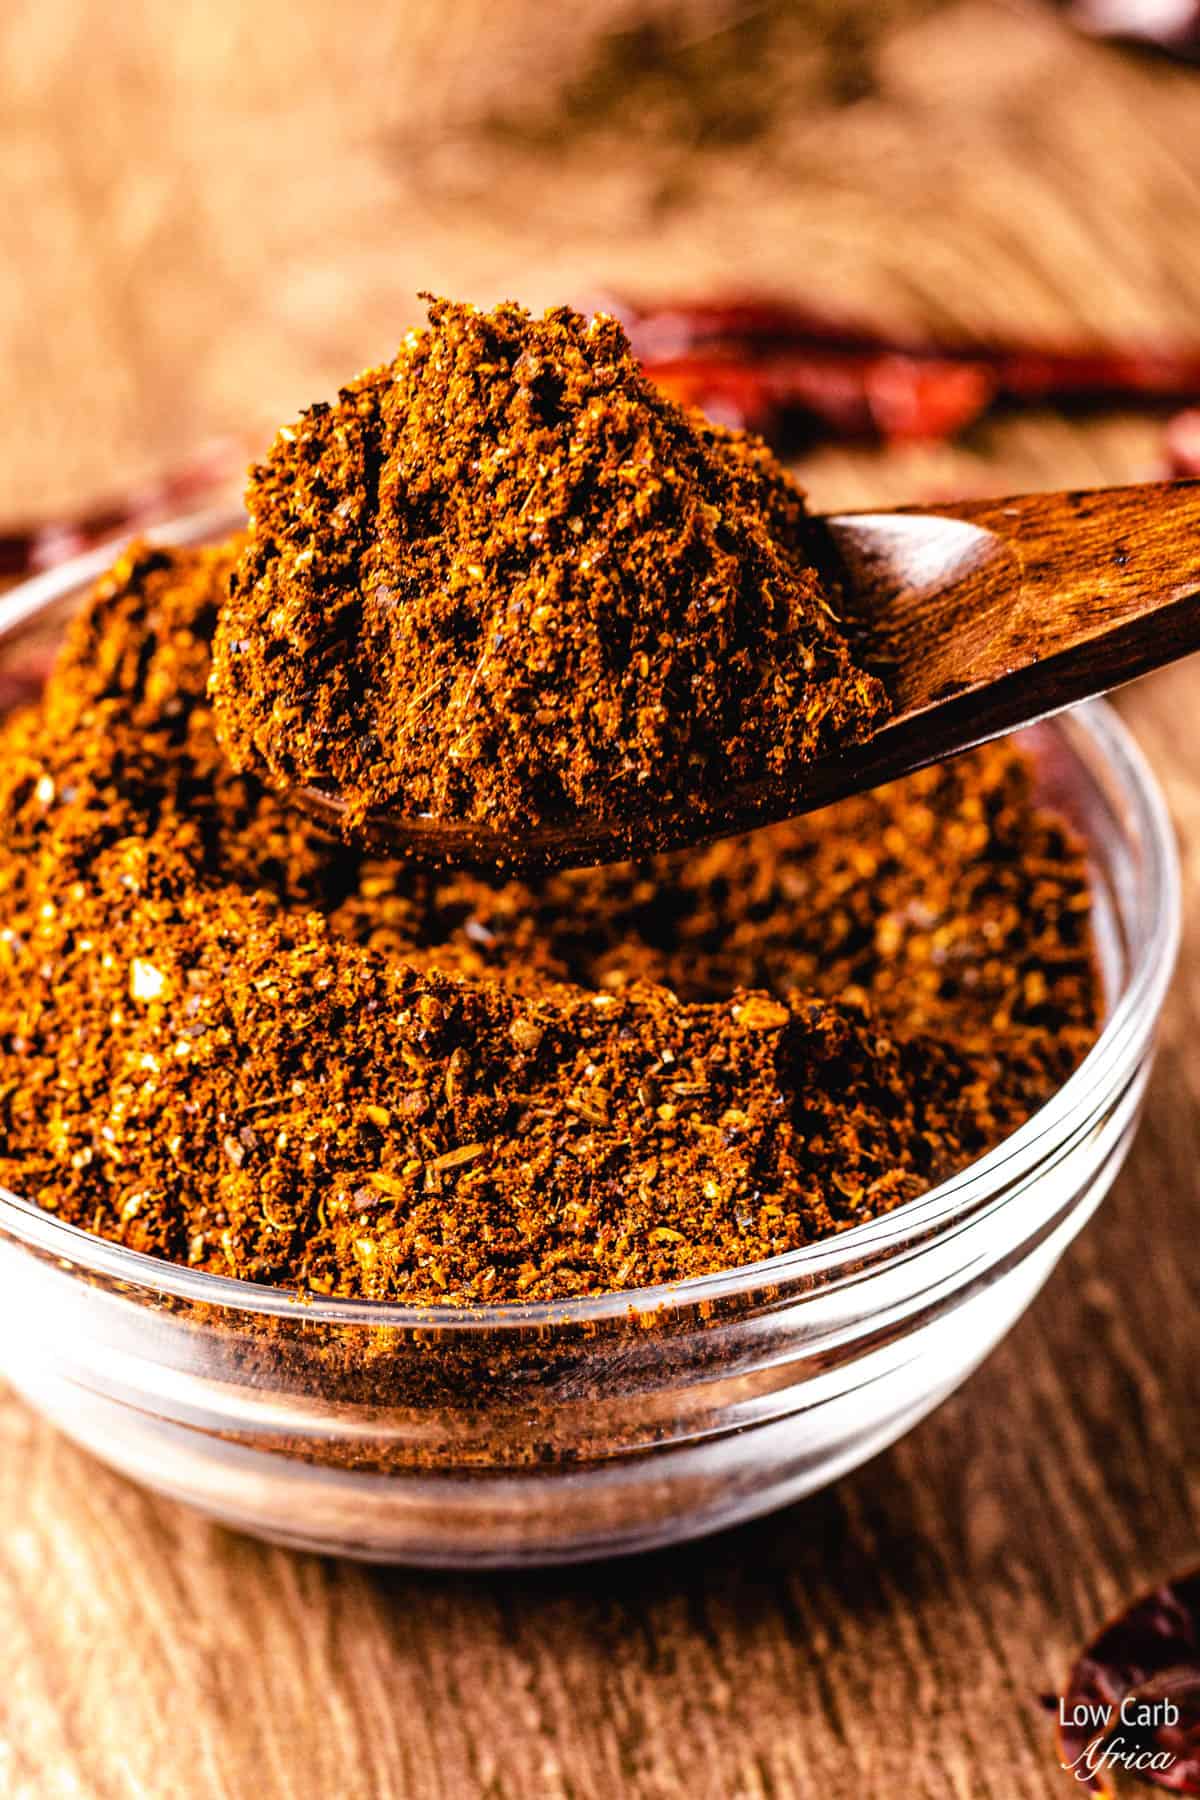 Harissa powder, scooping spices with a spoon